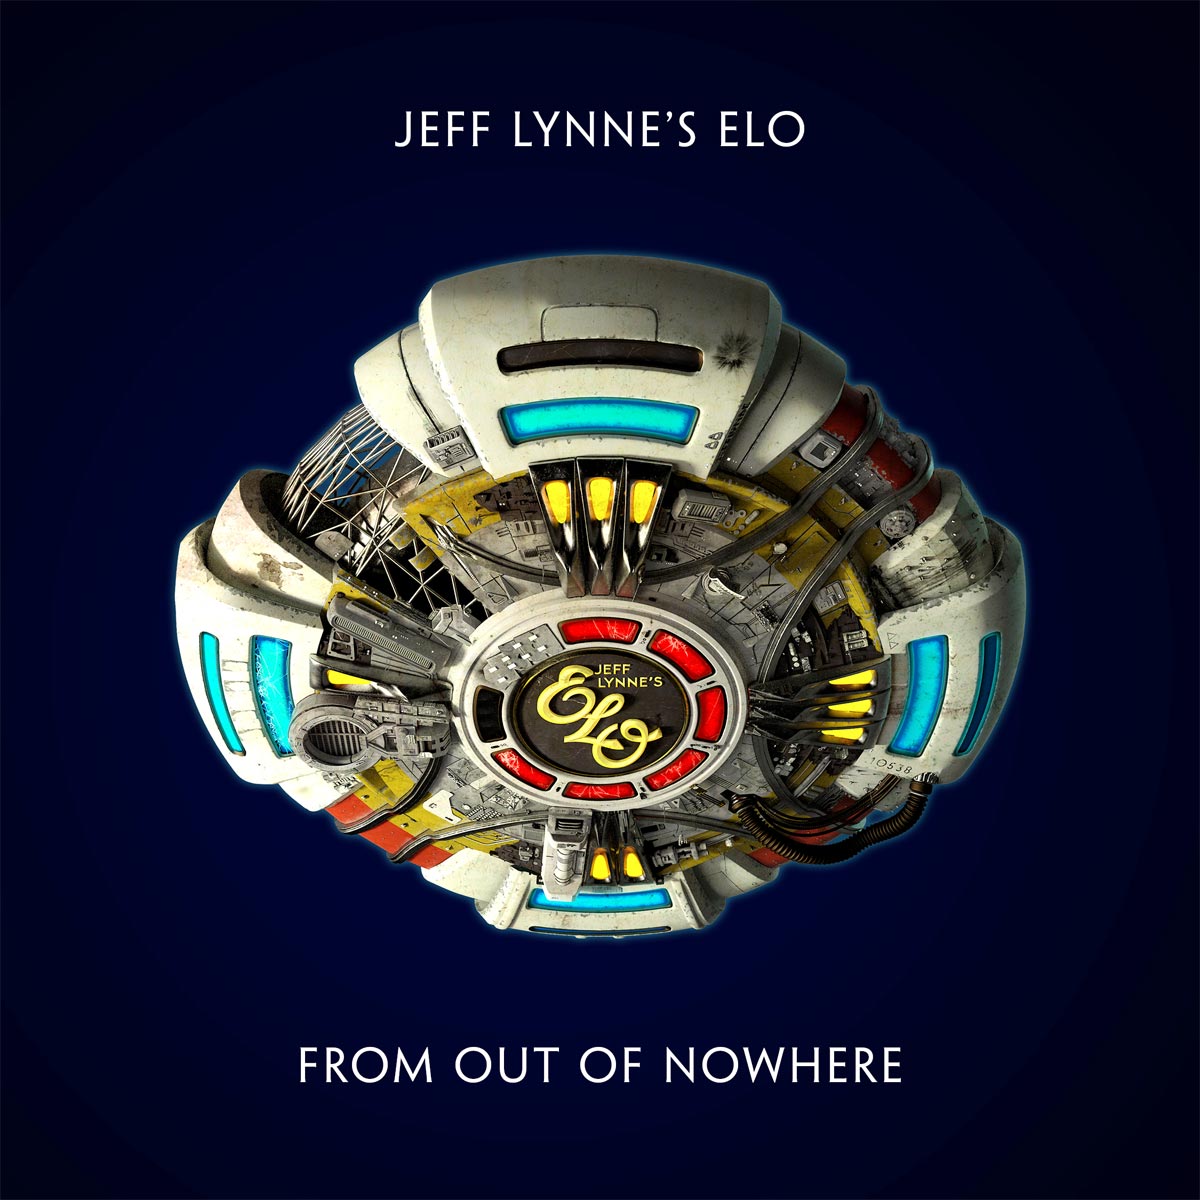 Jeff Lynne's ELO: From out of nowhere 2019 (DLX)